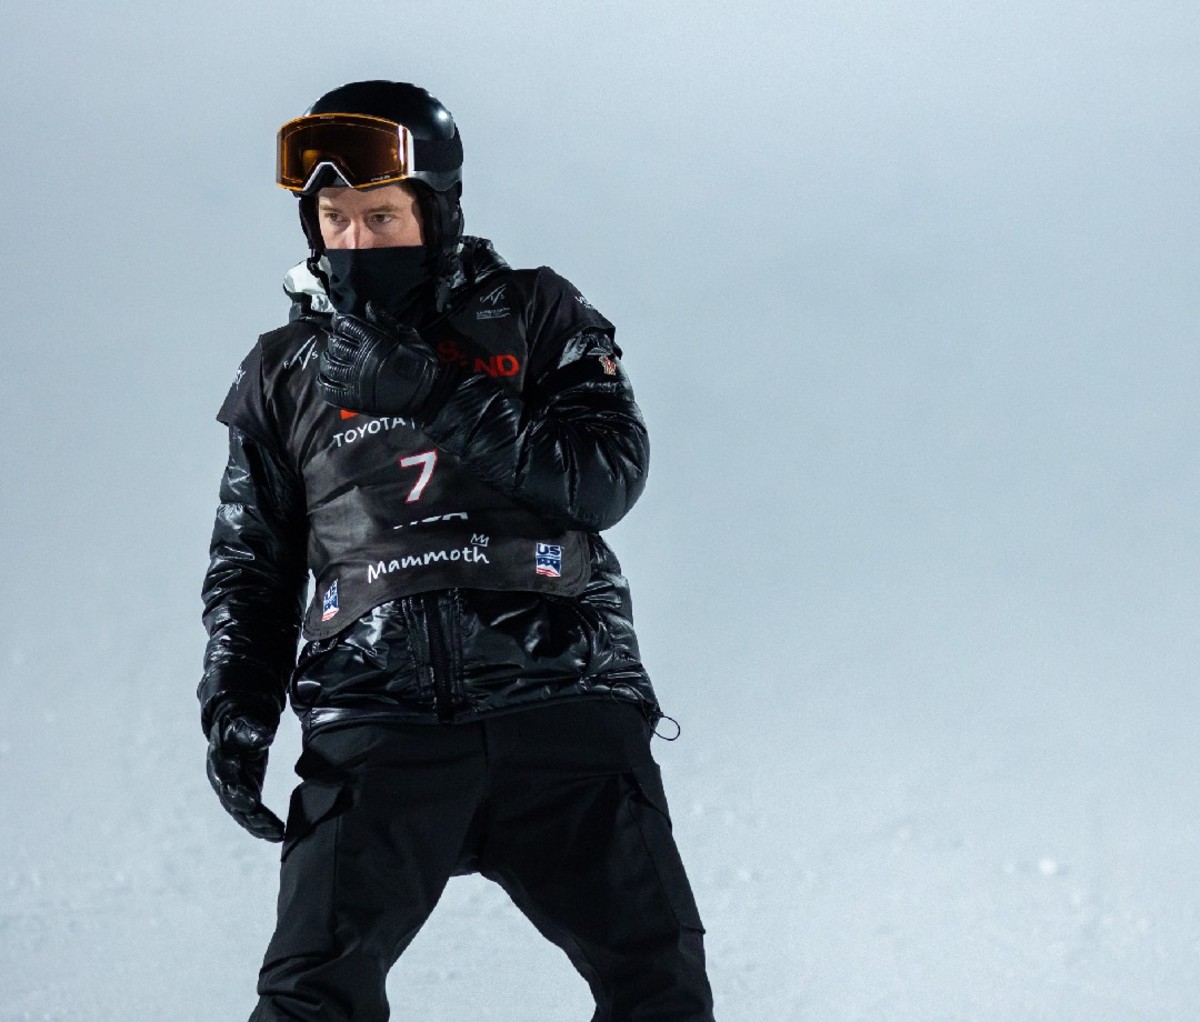 Snowboarder Shaun White stands at the top of the run